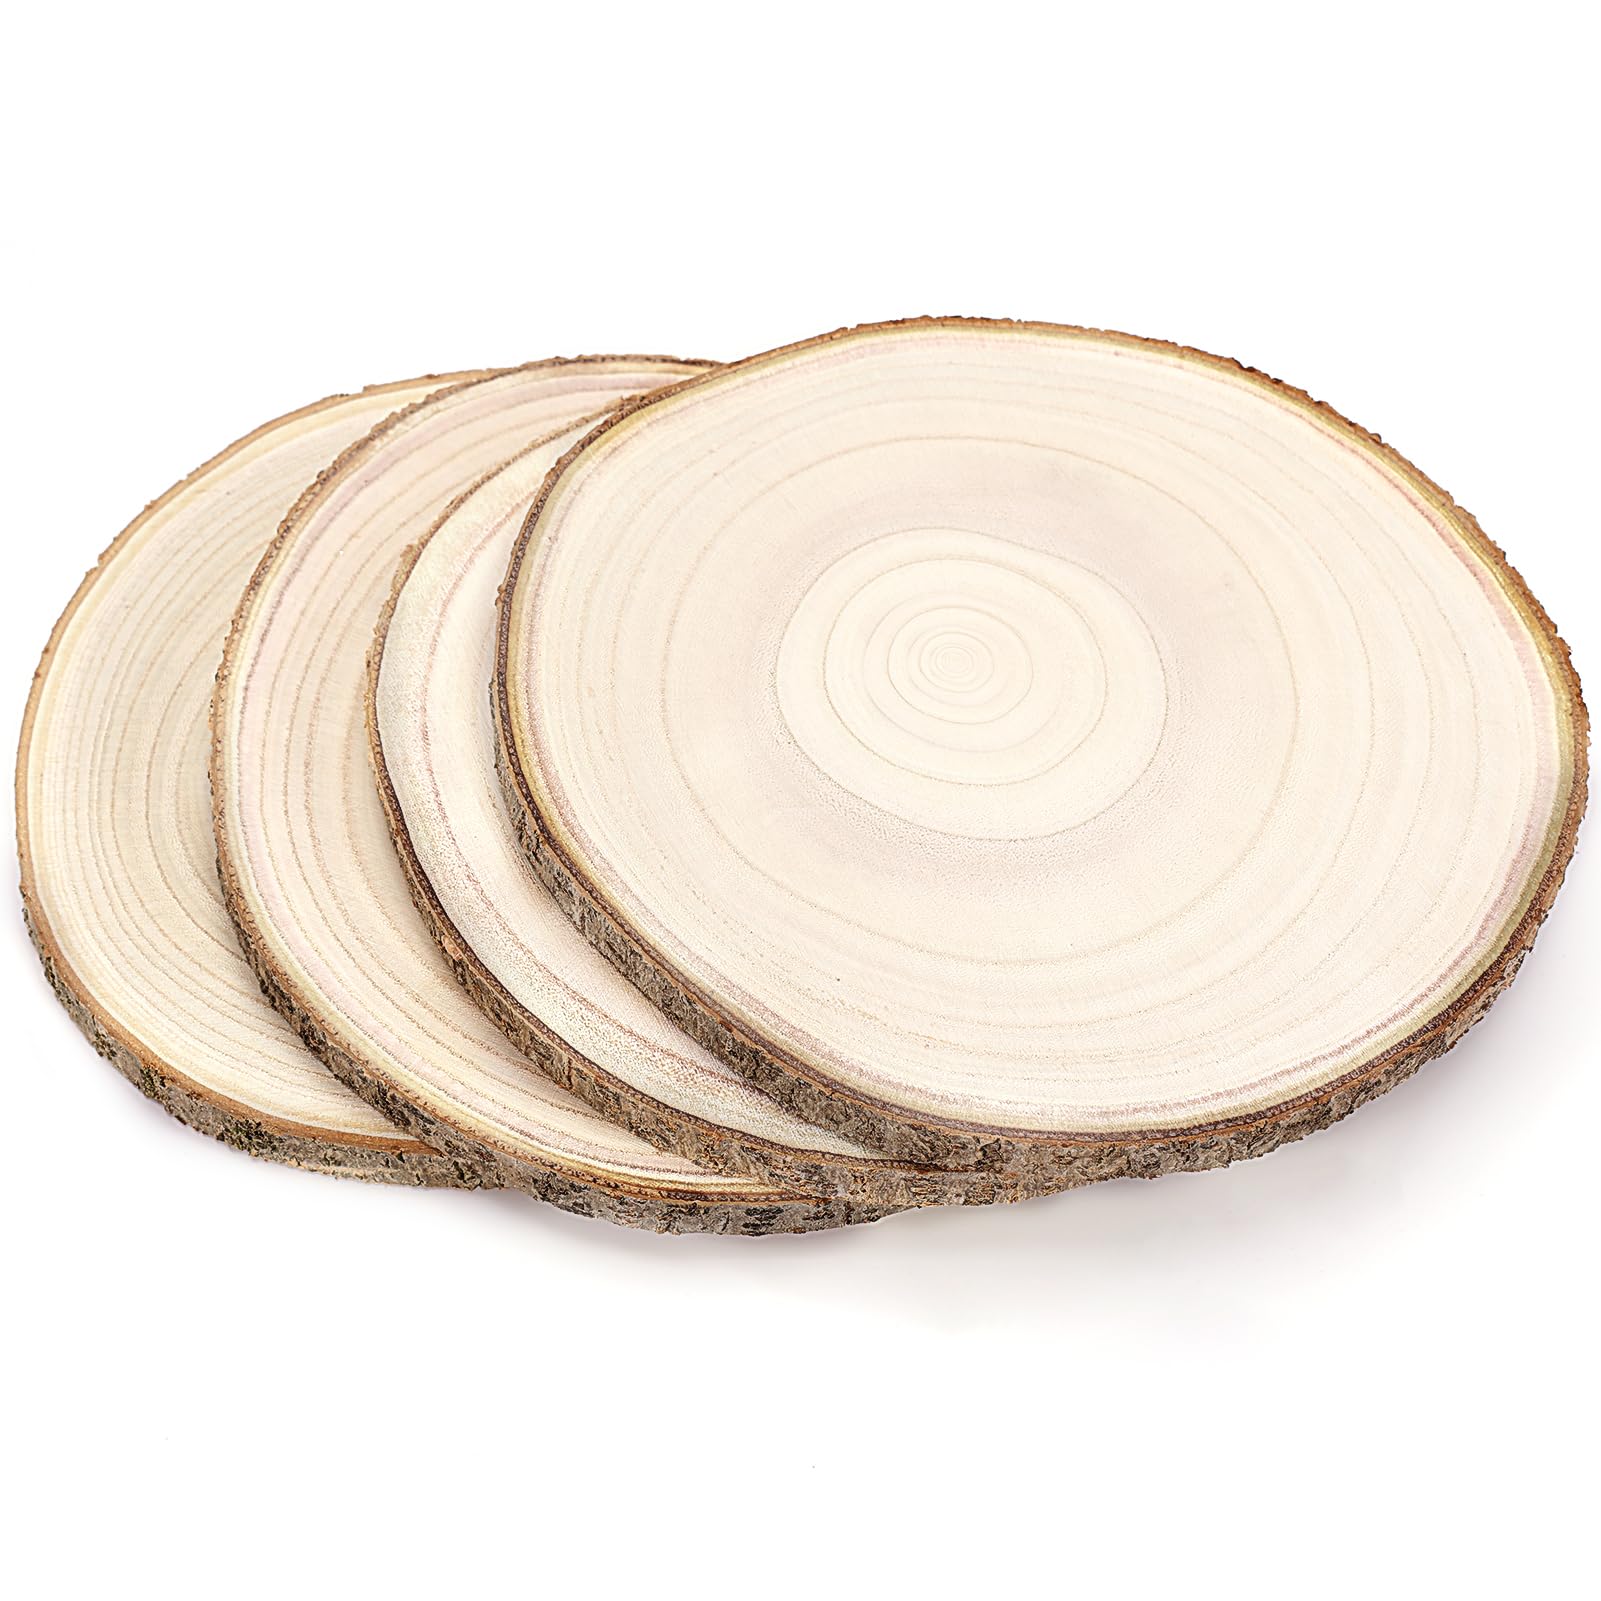  Caydo 4 Piece 10-11 Inch Wood Centerpieces for Tables, Large  Wood Slices for Centerpieces for Wedding Table Decoration, Candy Bar,  Party, and DIY Projects